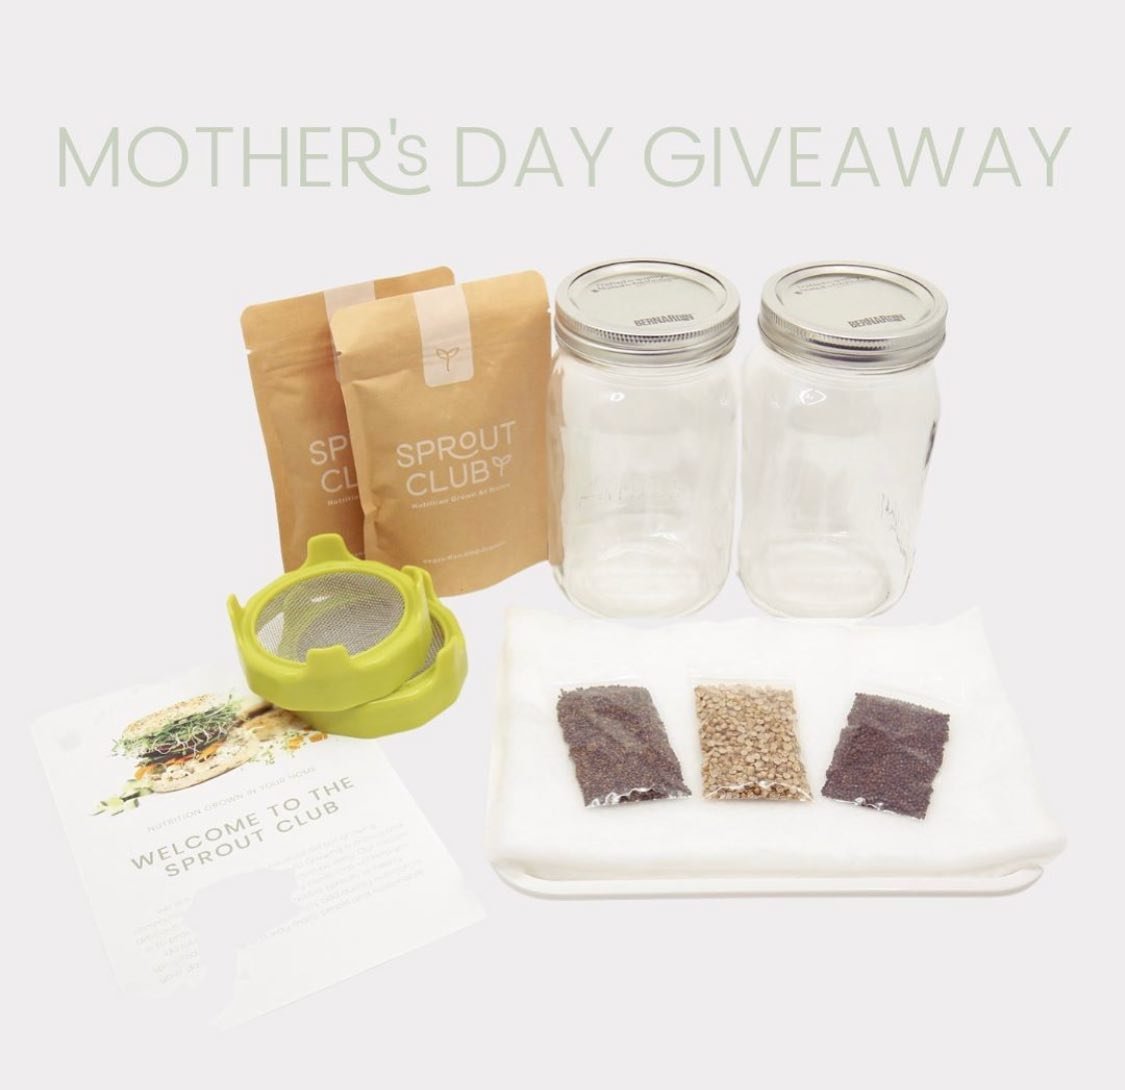 MOTHER&rsquo;S DAY GIVEAWAY 🌱 
It&rsquo;s here again! With Mother&rsquo;s Day just a few days away, maybe you want to gift your Mom something unique, or you&rsquo;re a Mother who deserves to treat yourself. Sprout Club wants to give YOU a sprout sta